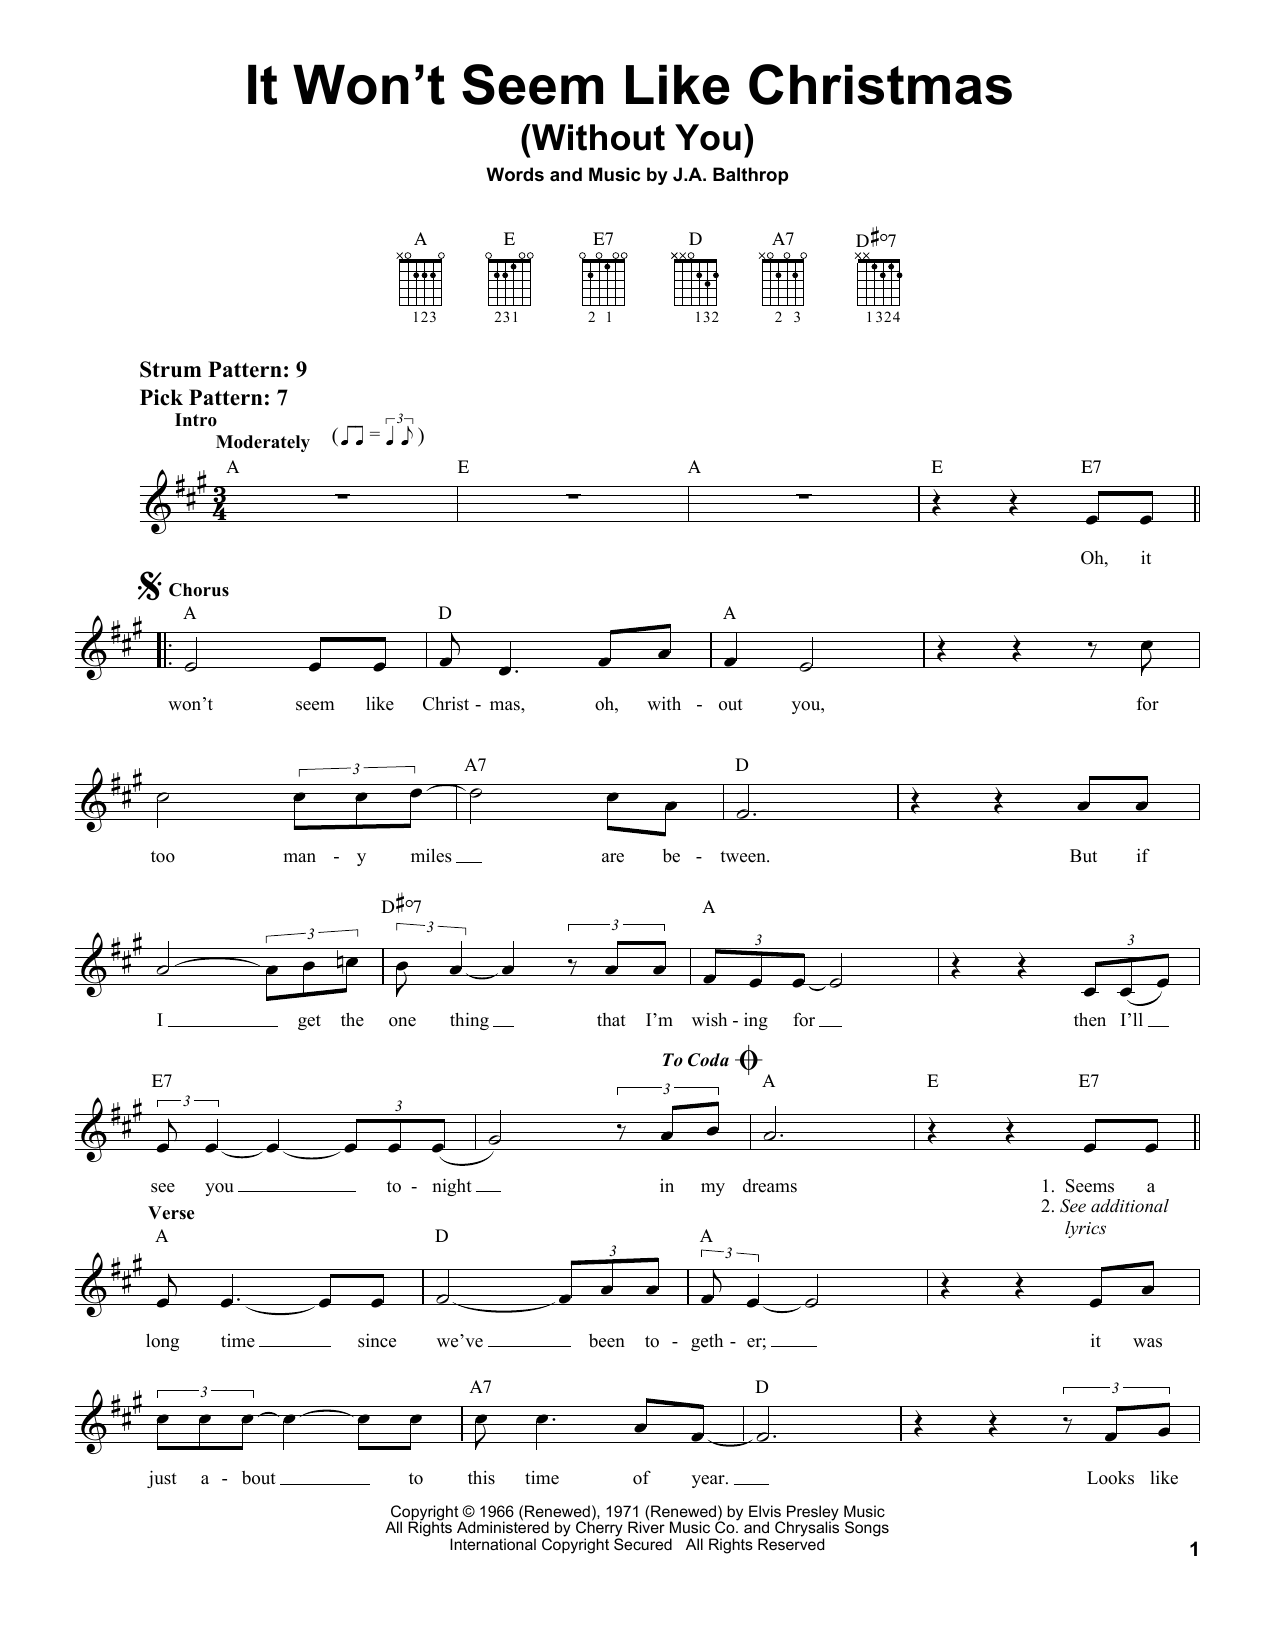 Elvis Presley It Won't Seem Like Christmas (Without You) sheet music notes and chords. Download Printable PDF.